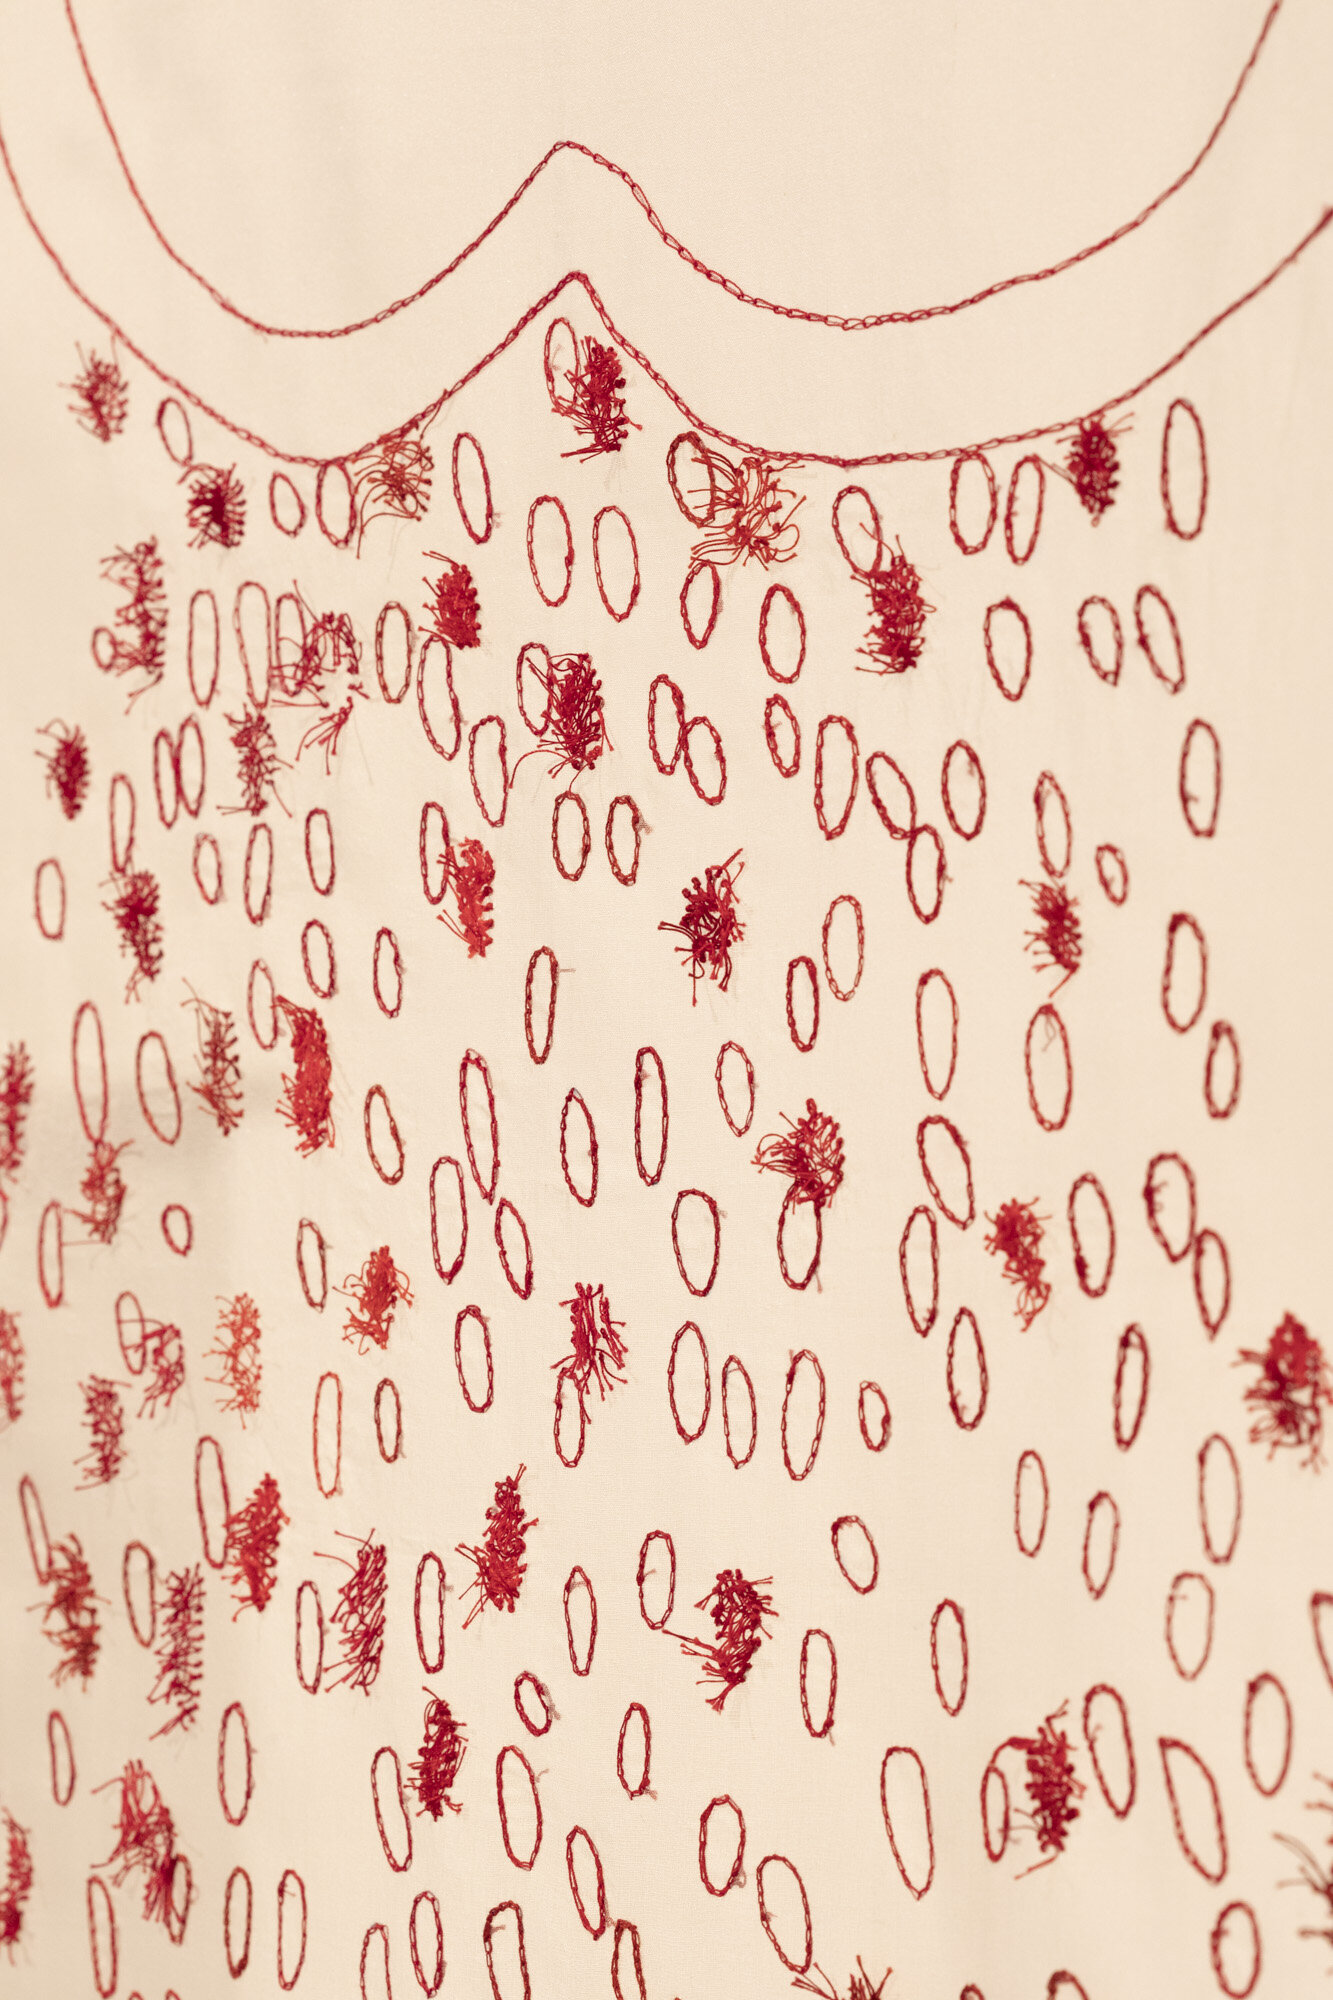   her heart   (detail) cotton hand embroidery on silk organza, 70cm x 100cm June 2021 AIRspace Projects  Image:  Joy M Lai   